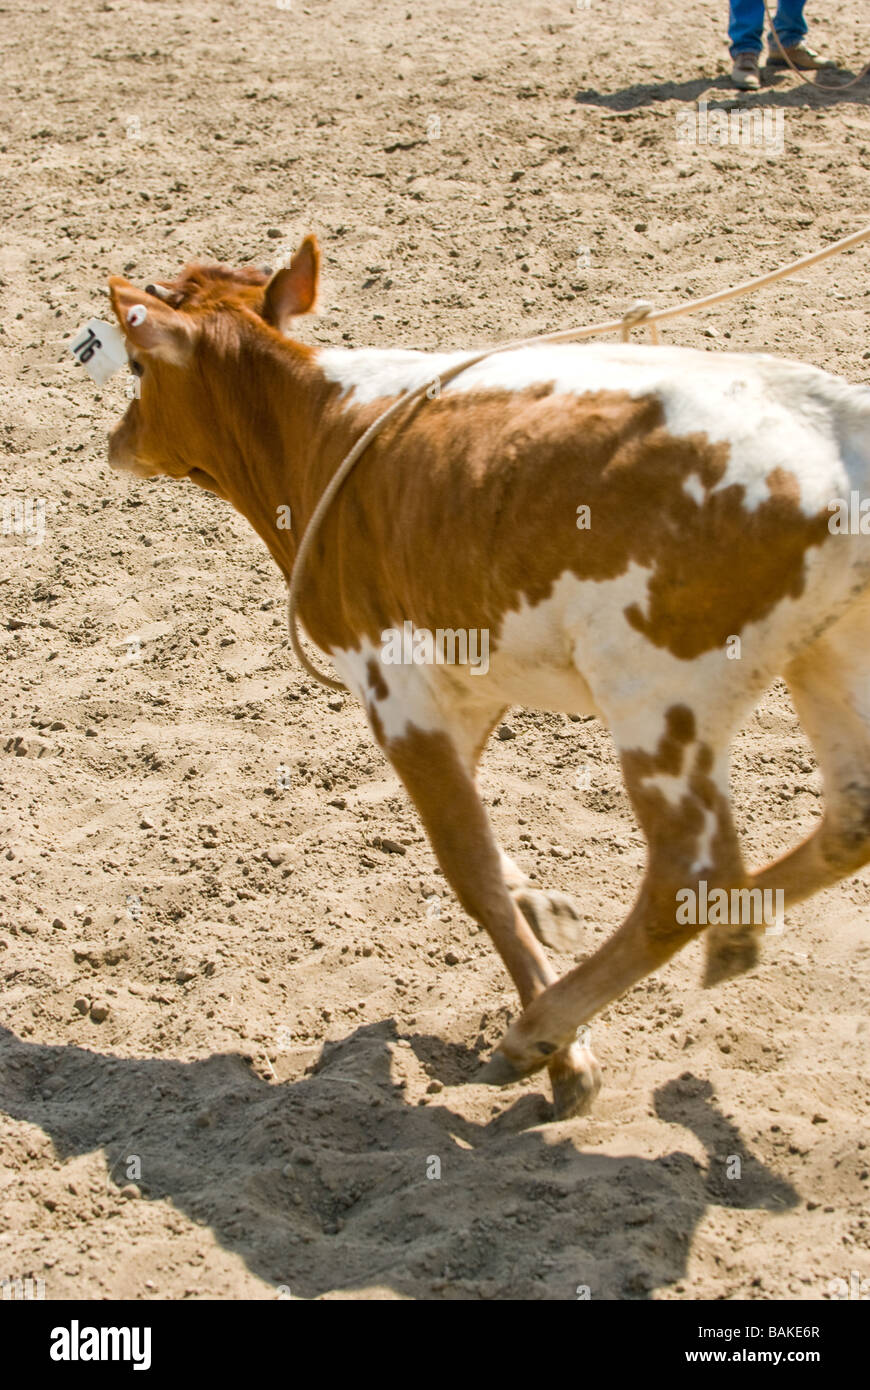 Calf running at a rodeo with a lasso around its neck Stock Photo